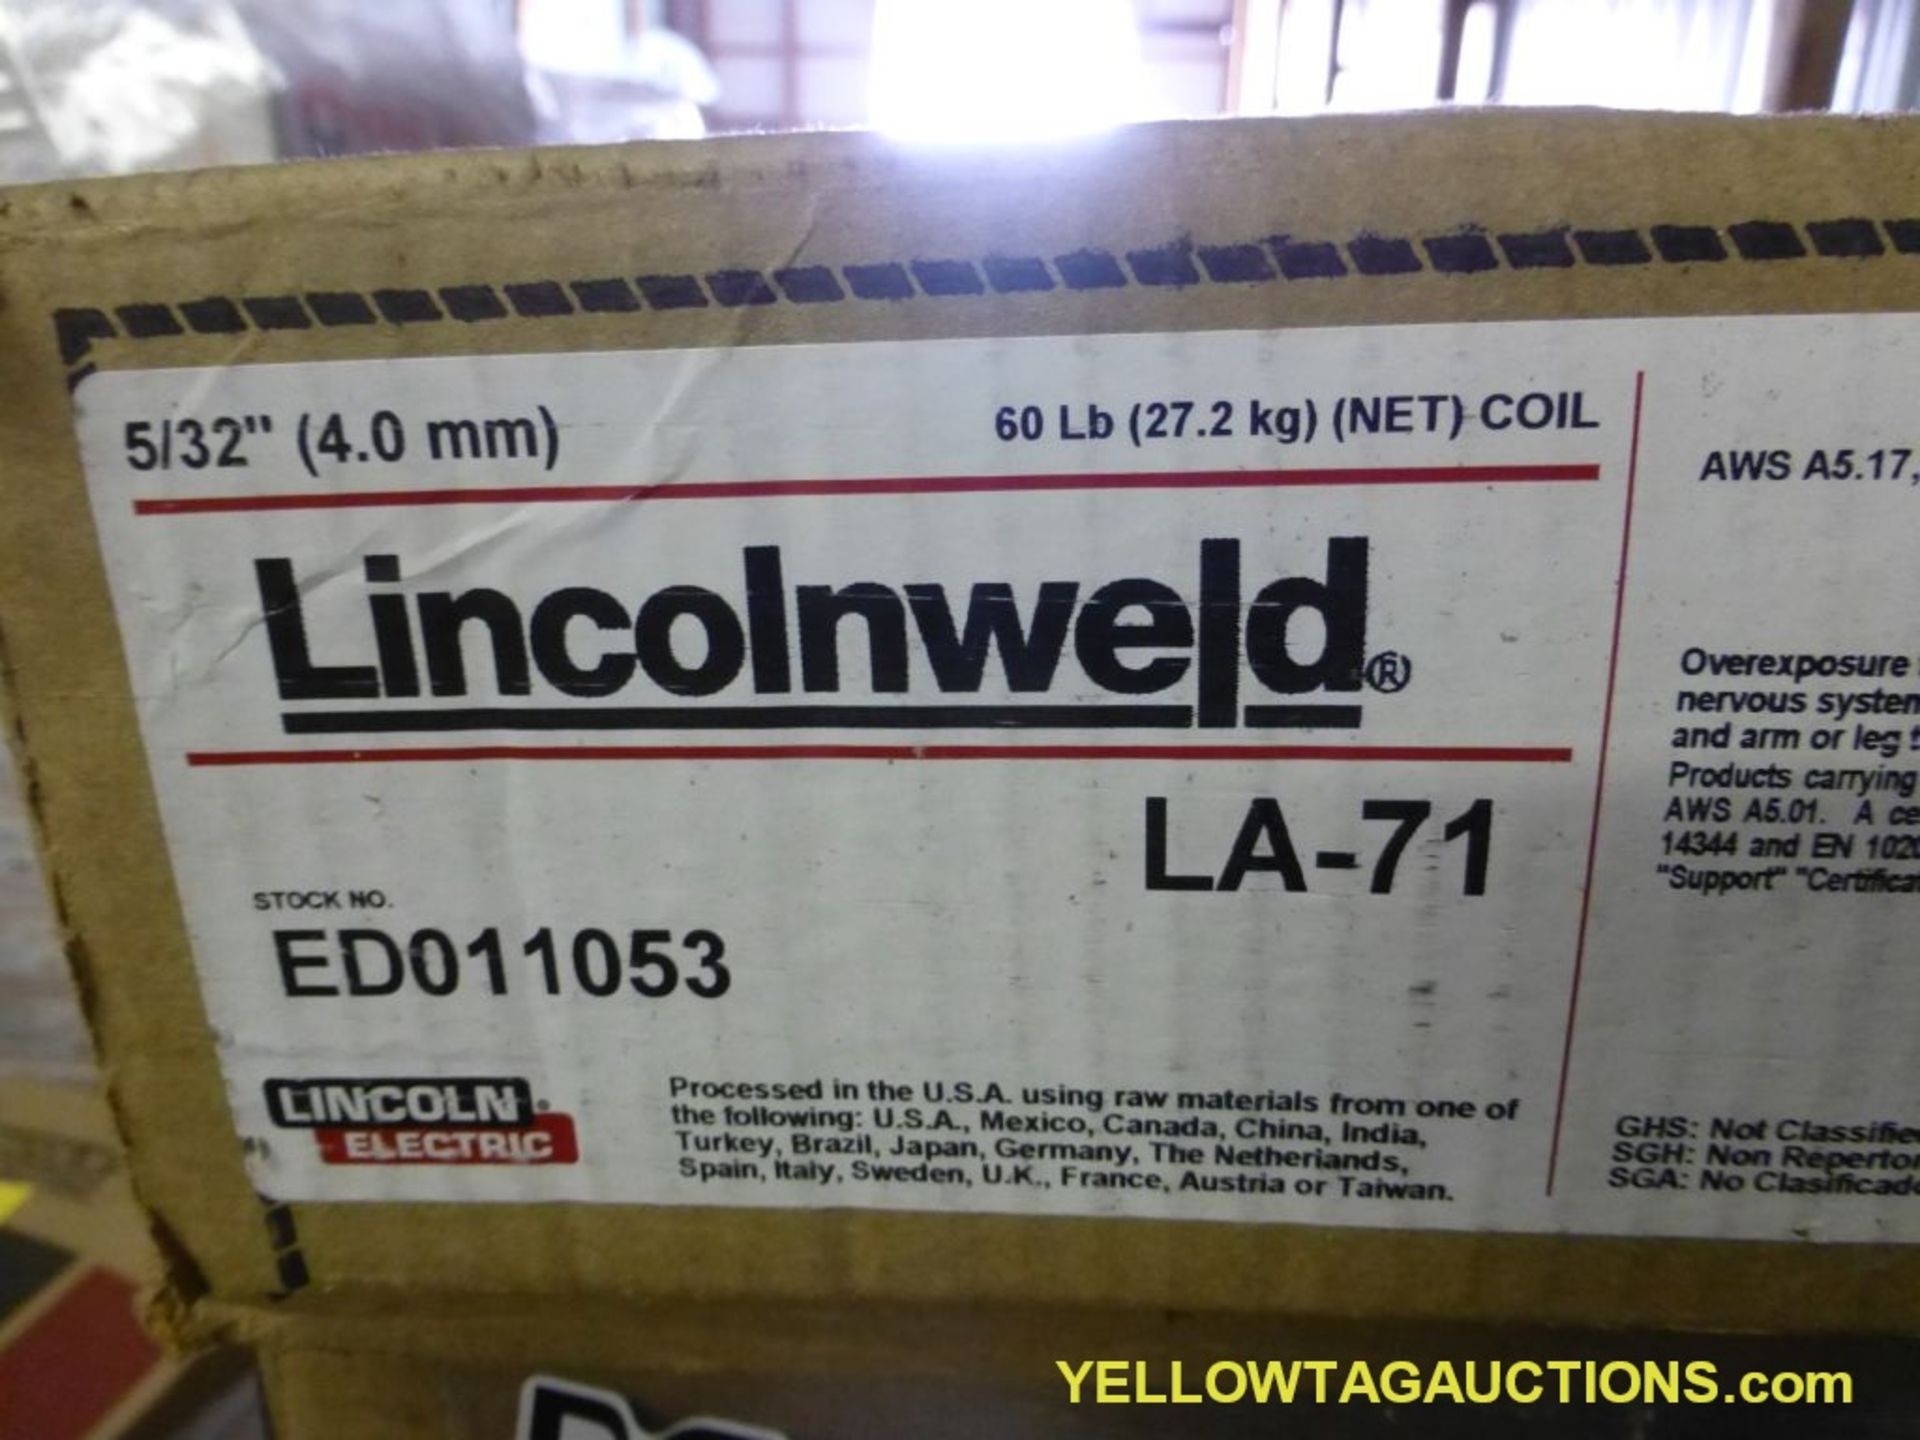 Lot of (54) Boxes of Lincoln Electric Lincolnweld L-S3 Welding Wire | Model No. ED015 248; New Surpl - Image 5 of 5